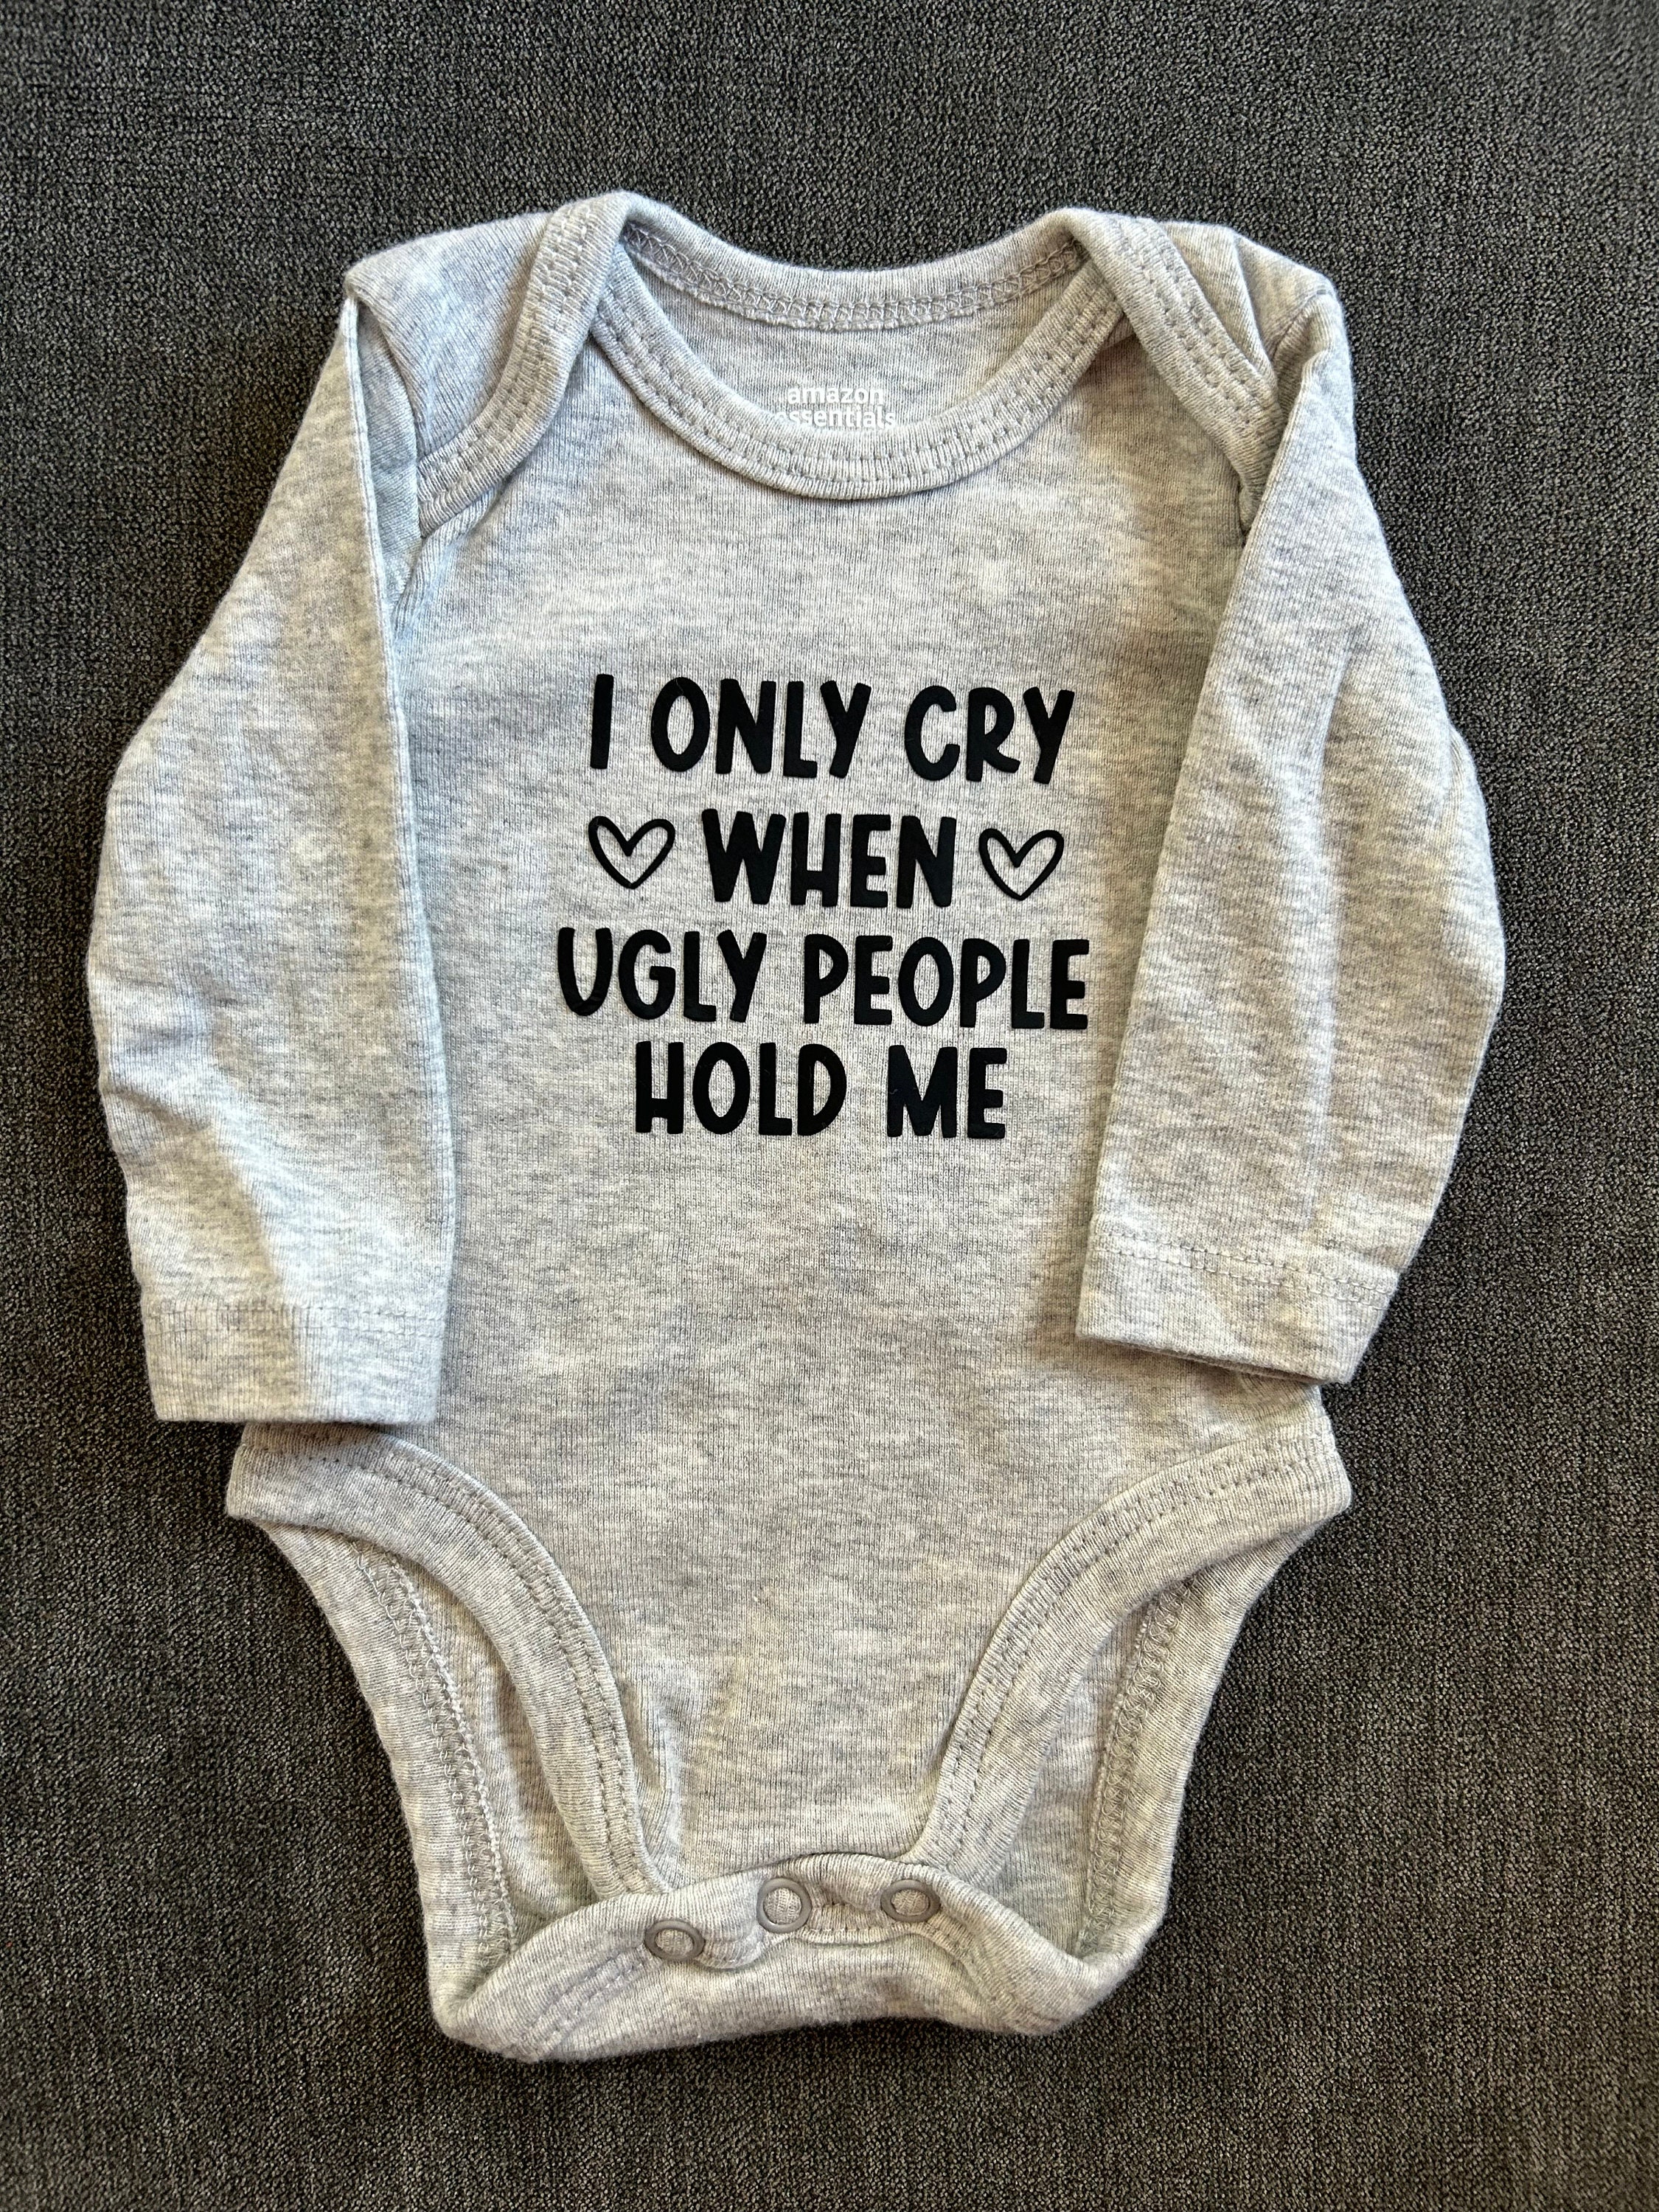 I only Cry When Ugly People Hold Me Funny Dresses For Baby, Newborn Babies  Skirts, Infant Princess Dress, 0-24M Kids Graphic Clothes (Pink Sleeveless